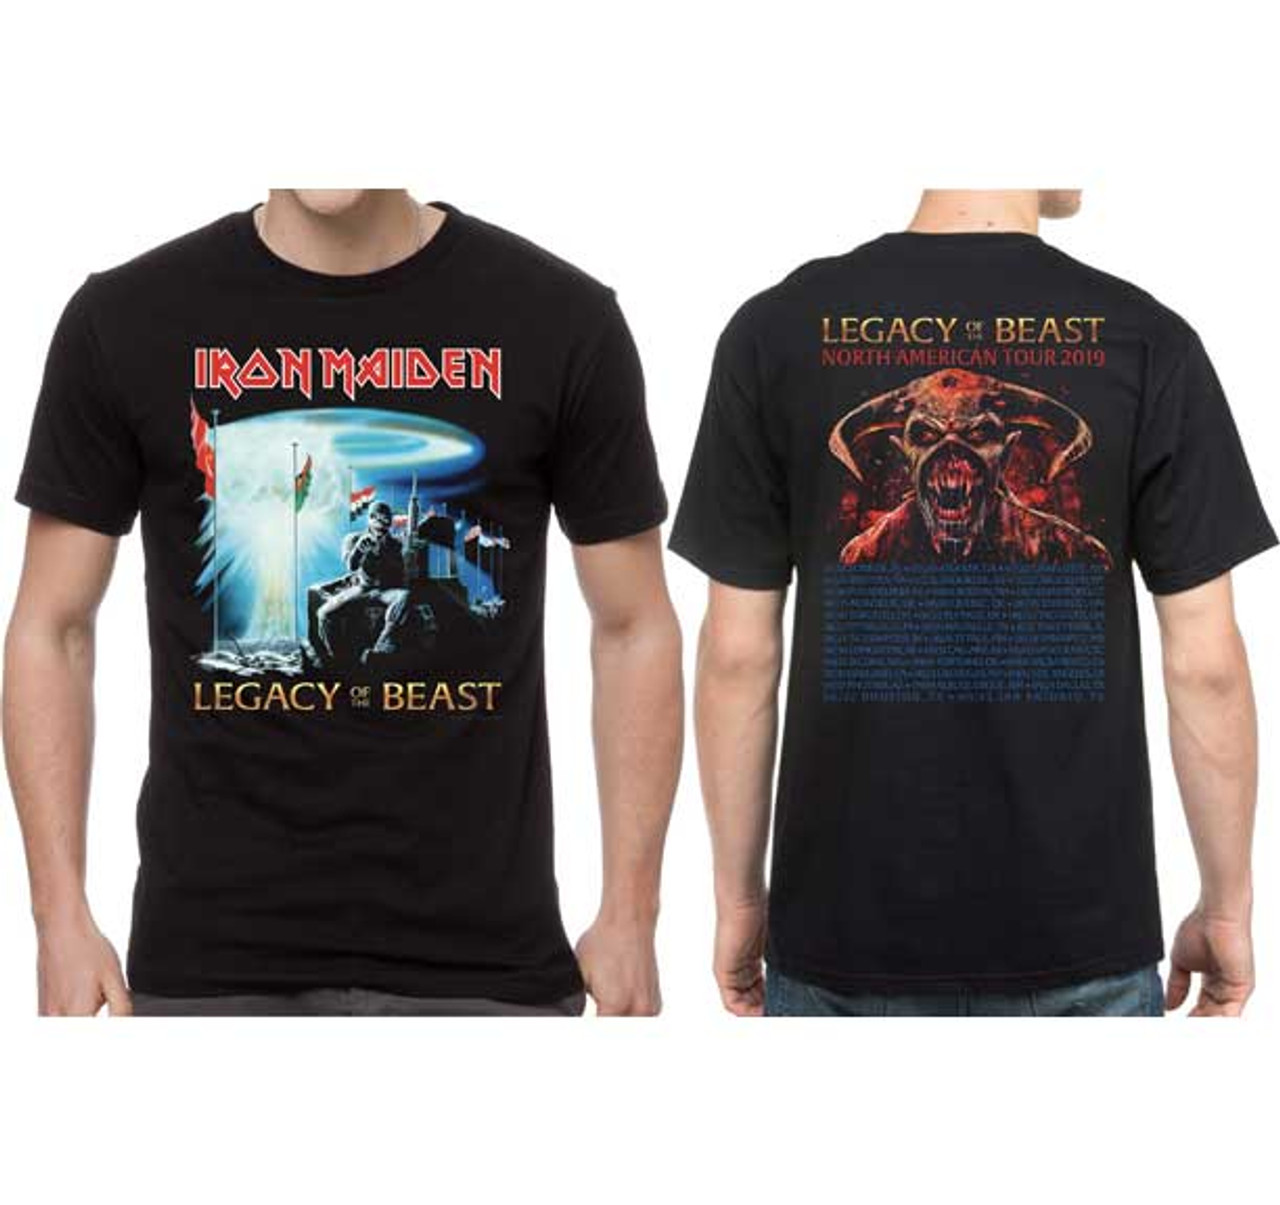 Modsige Frigøre Muldyr Buy Iron Maiden The Legacy of the Beast T-shirt | Old School Heavy Metal  Tees from Old School Tees